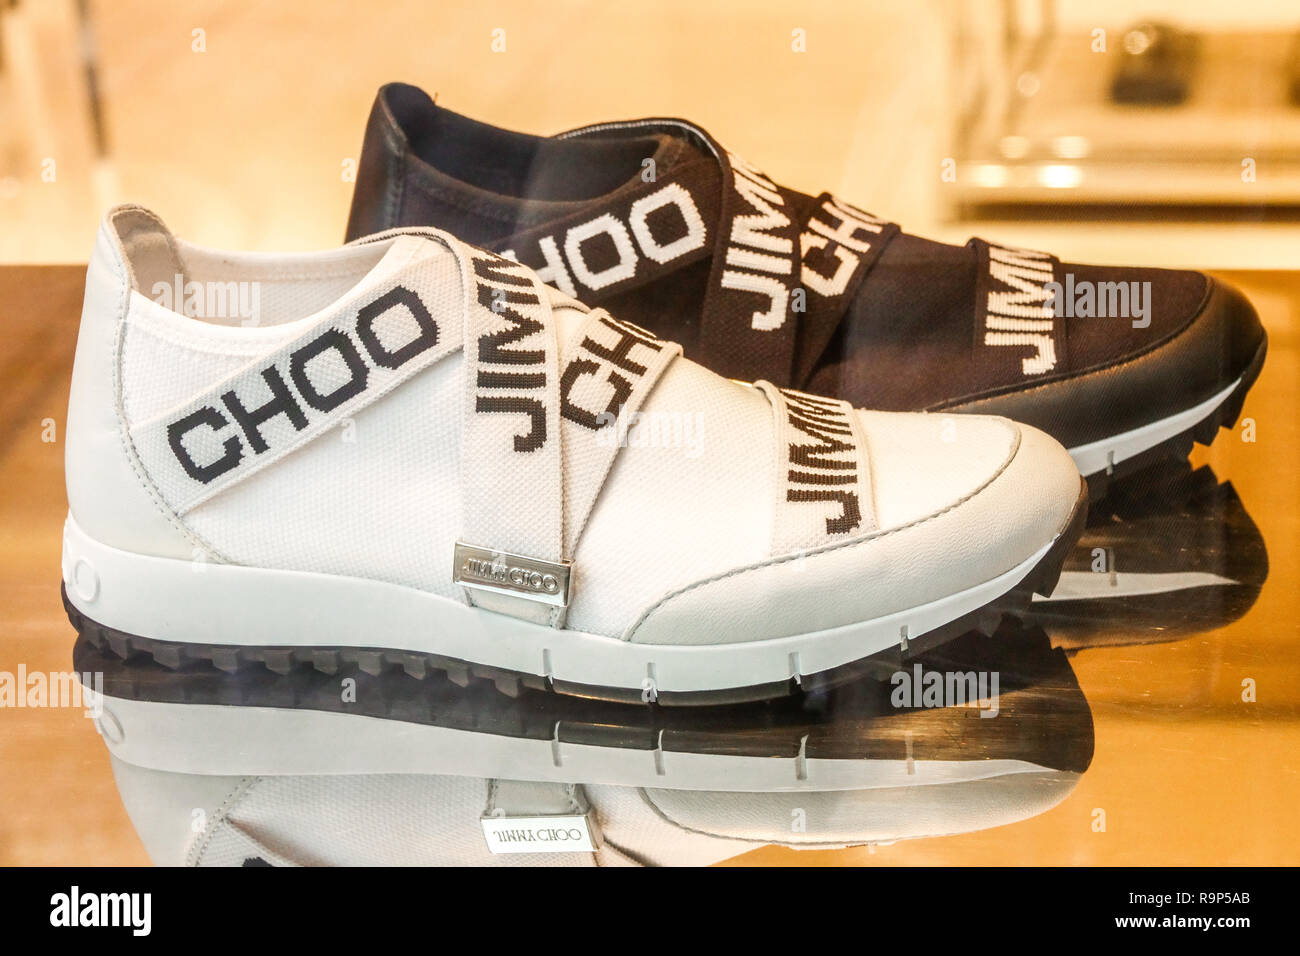 Jimmy choo shoe hi-res stock photography and images - Page 3 - Alamy